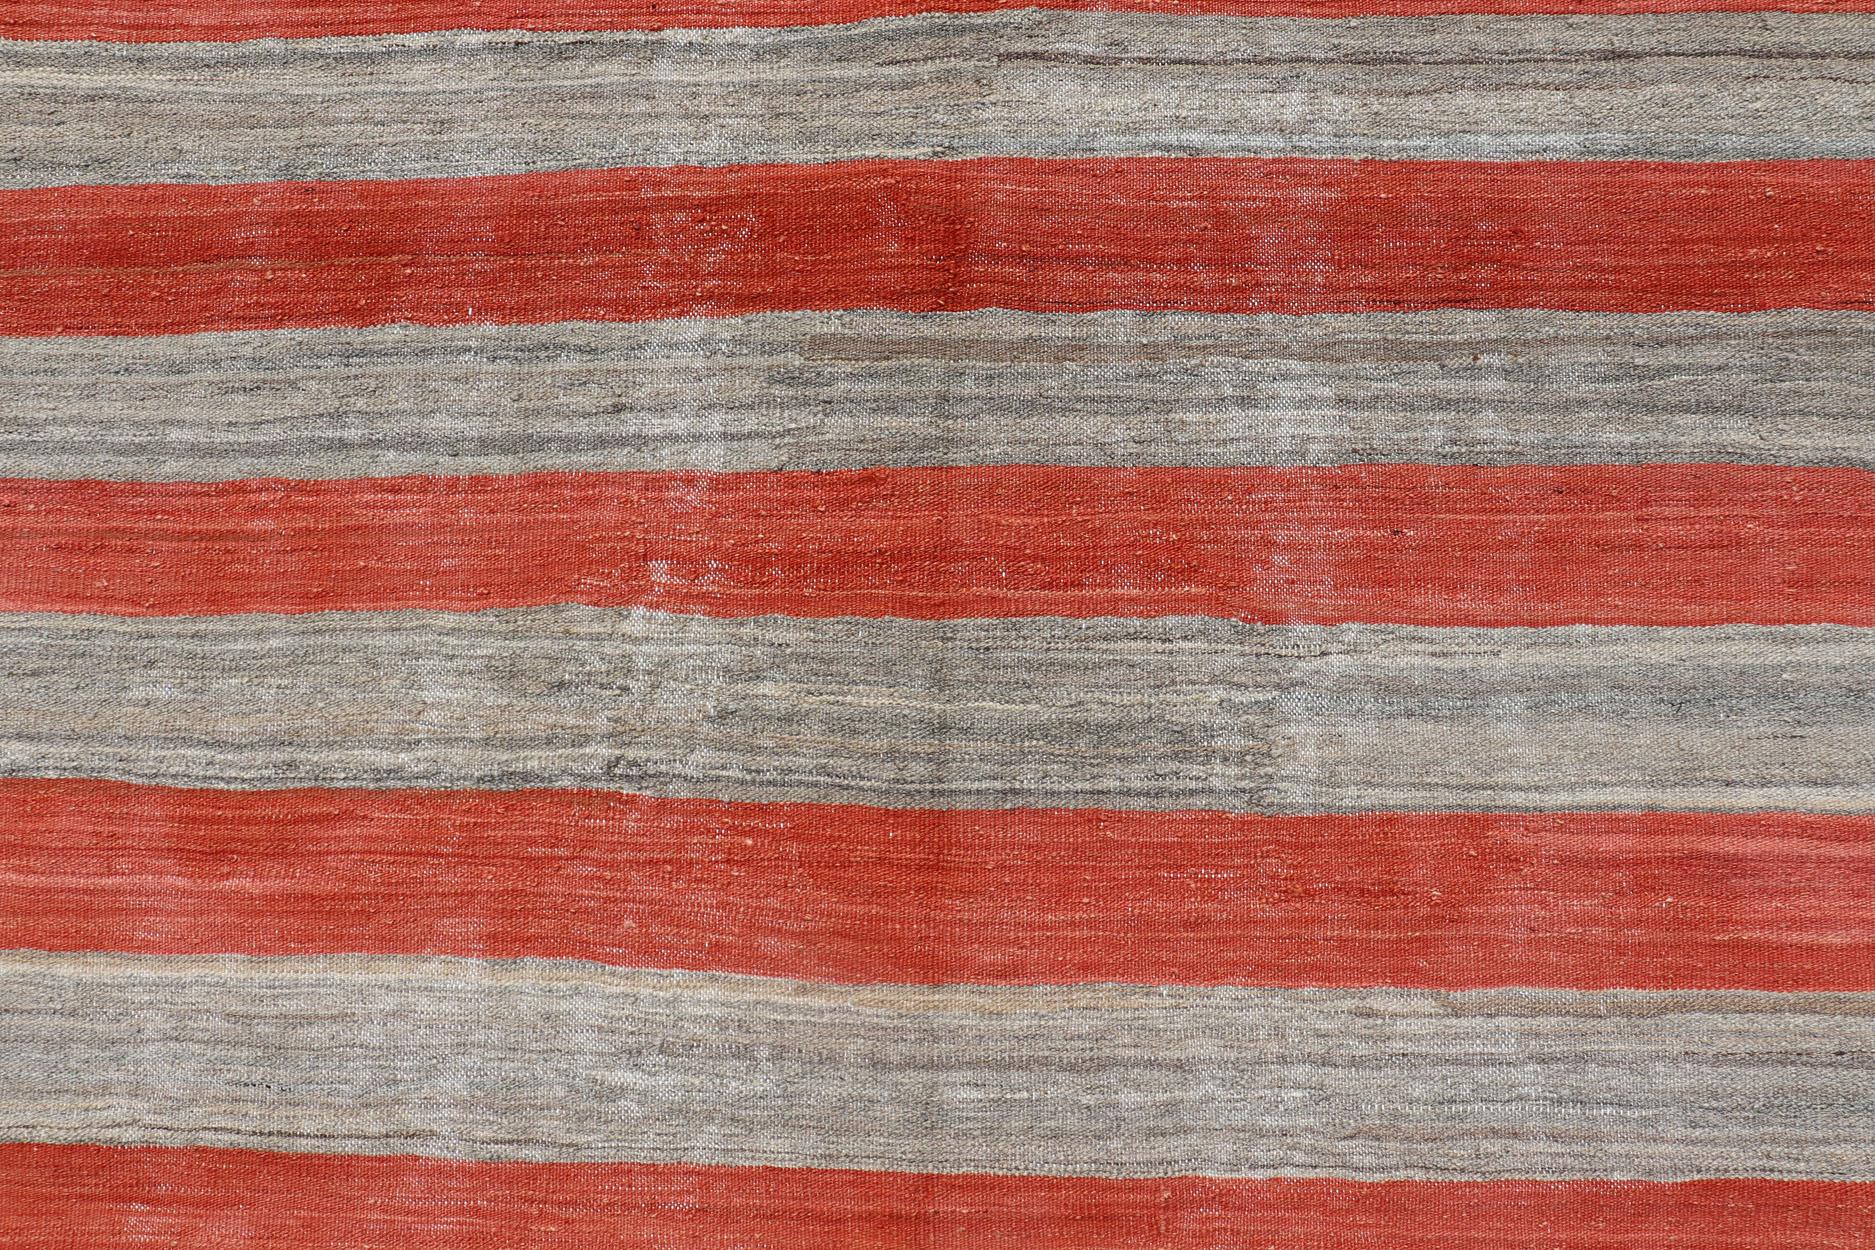 Wool Flat-Weave Modern Kilim Wide Runner with Stripes in Shades of Orange Red & Gray For Sale